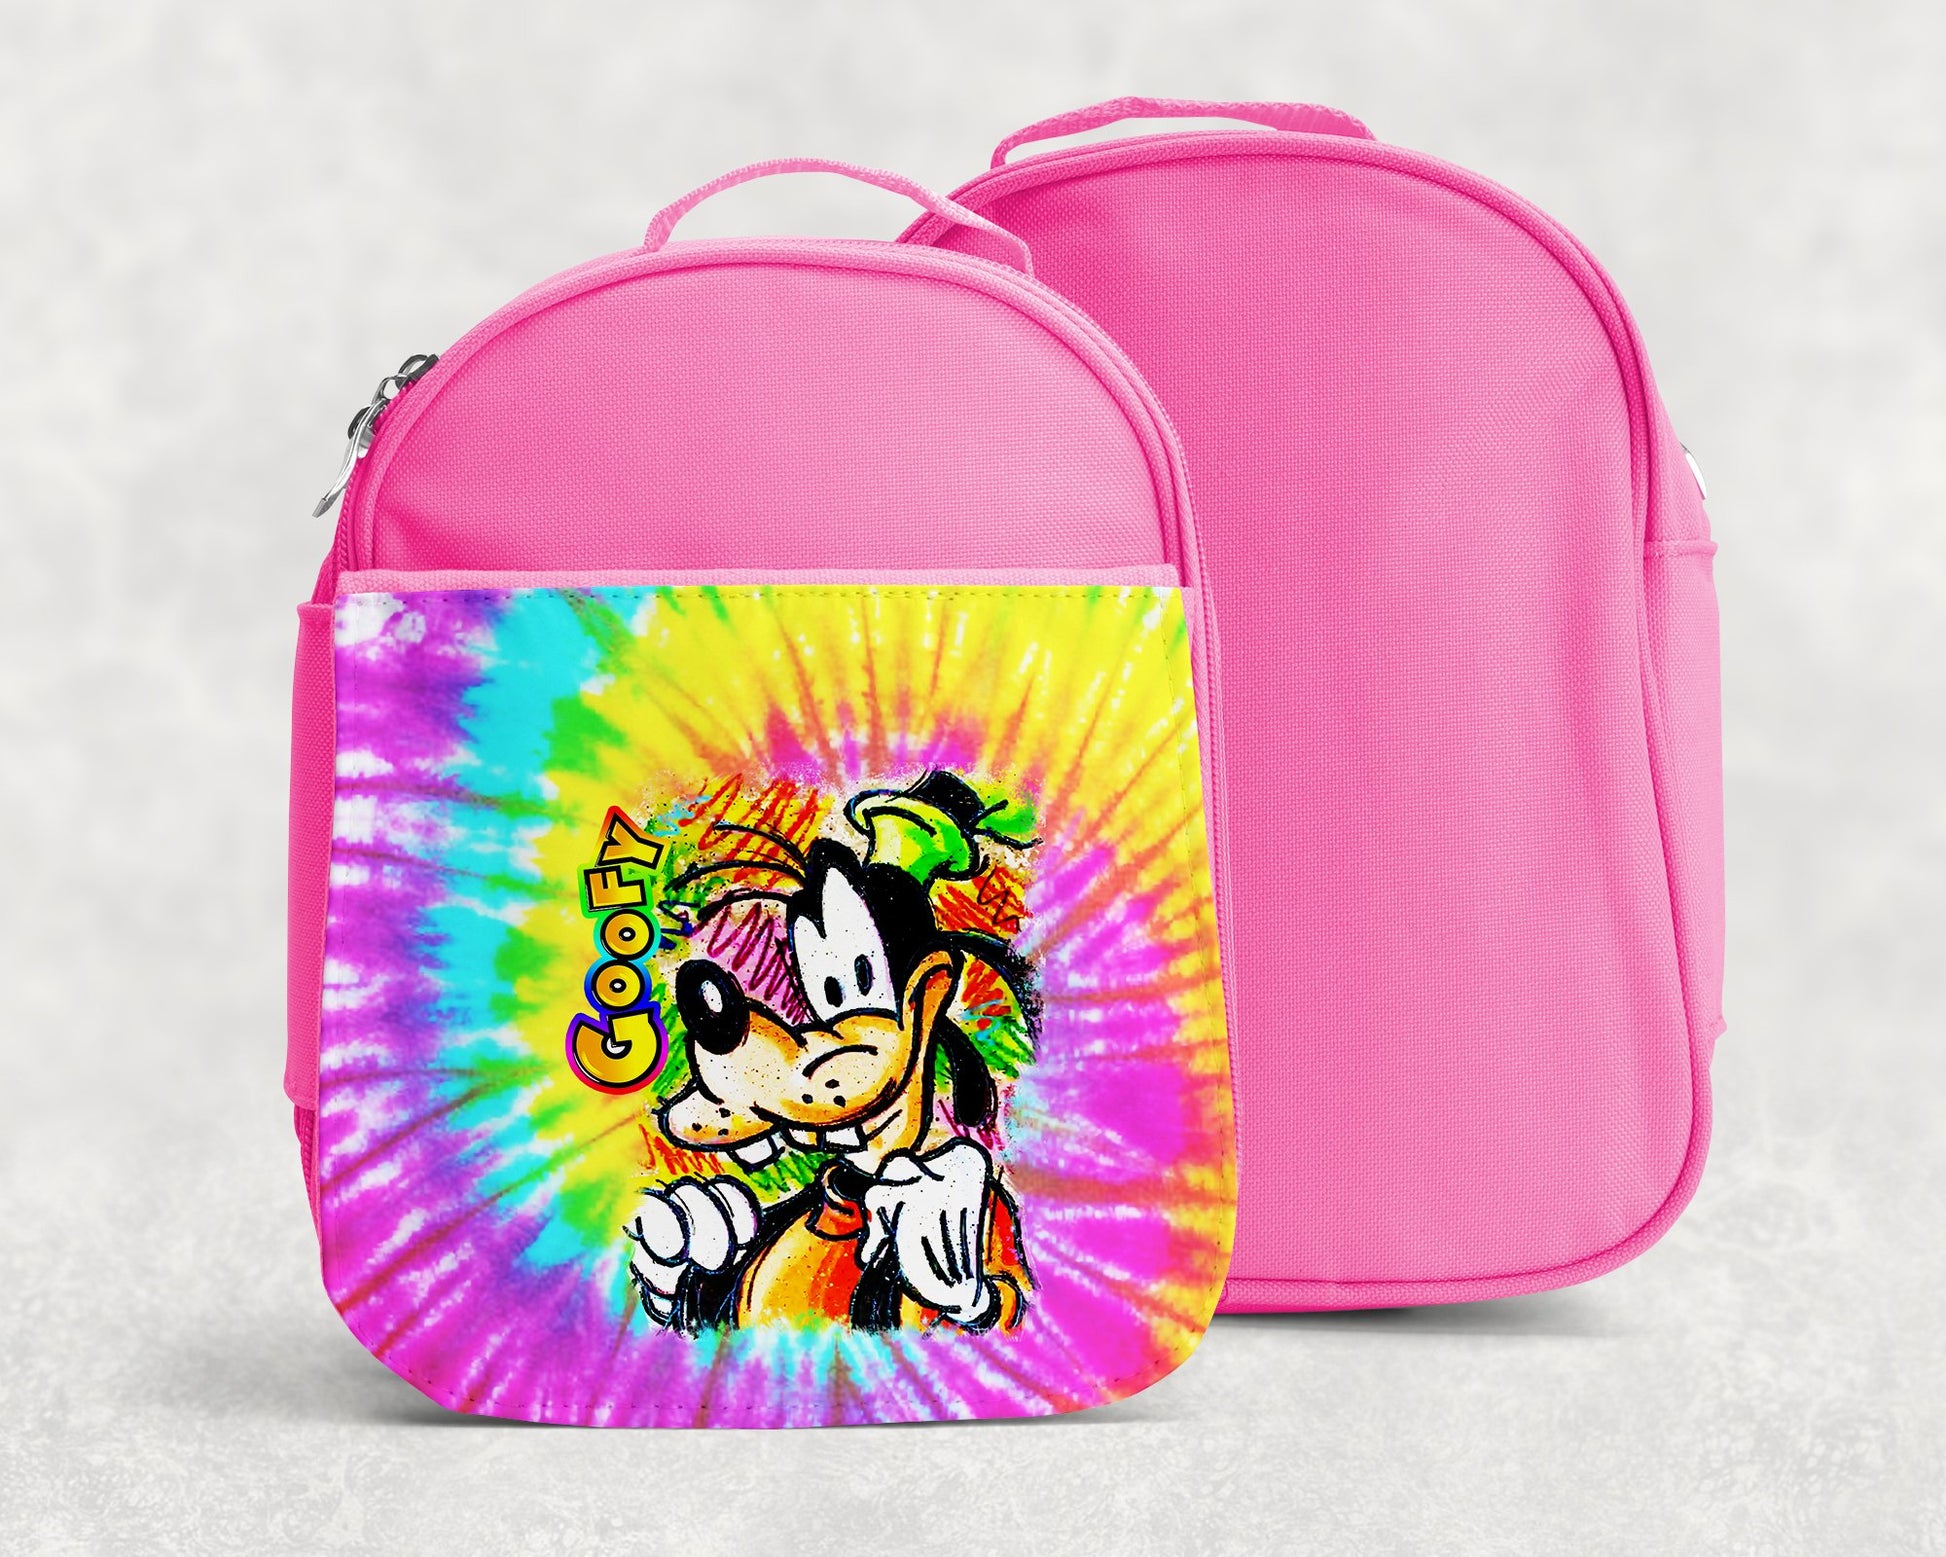 Goofy Lunch Tote